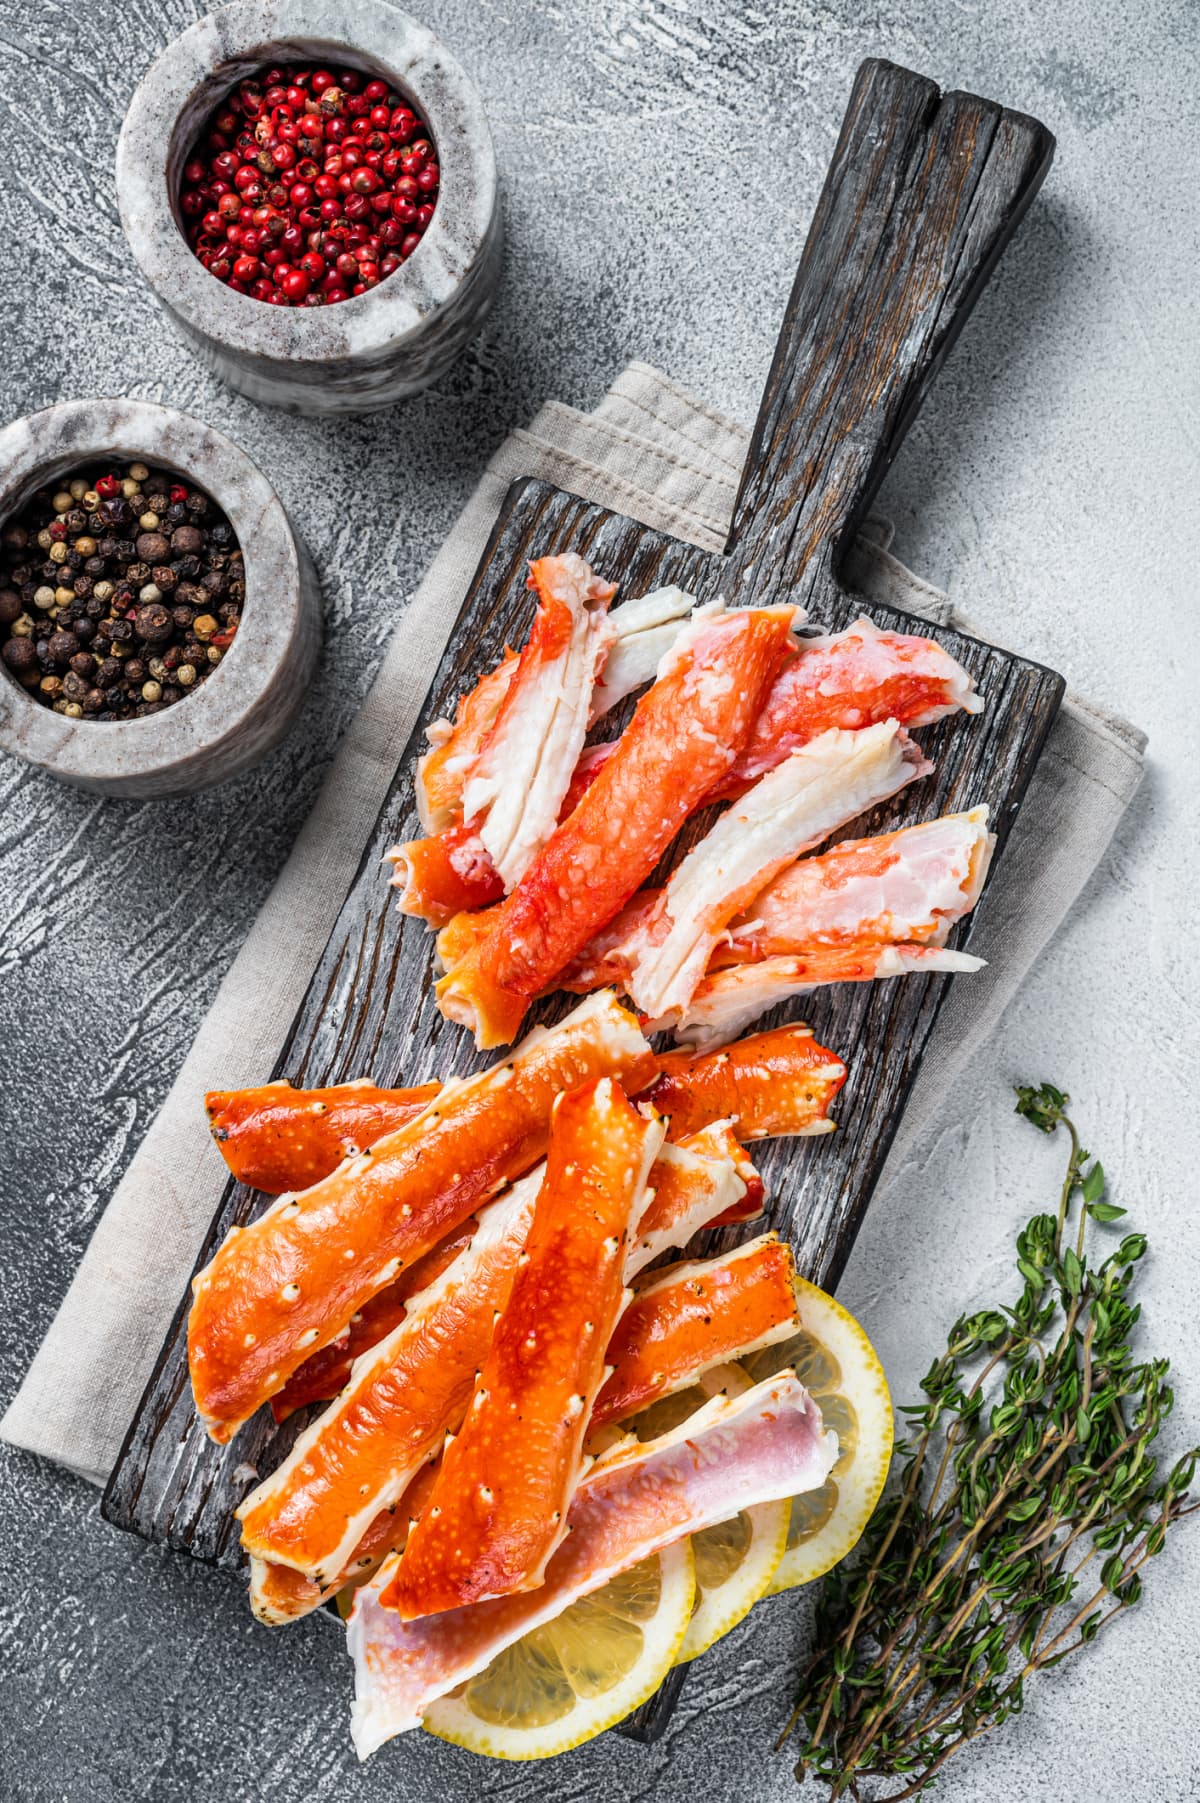 Cooked king crab leg meat on a wooden board with herbs